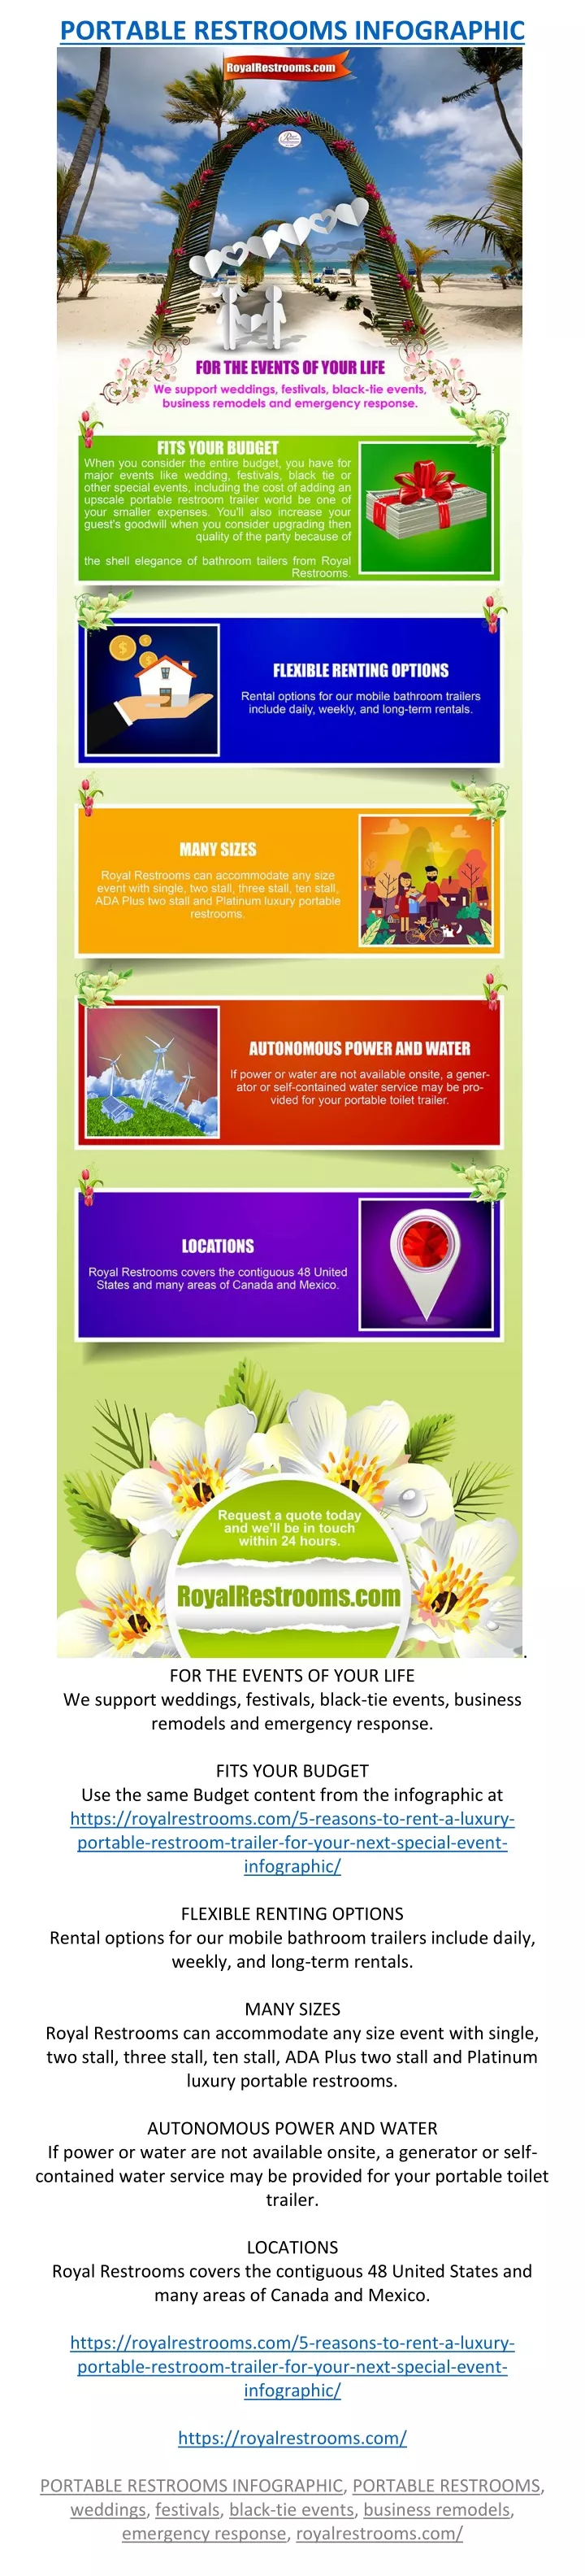 portable restrooms infographic